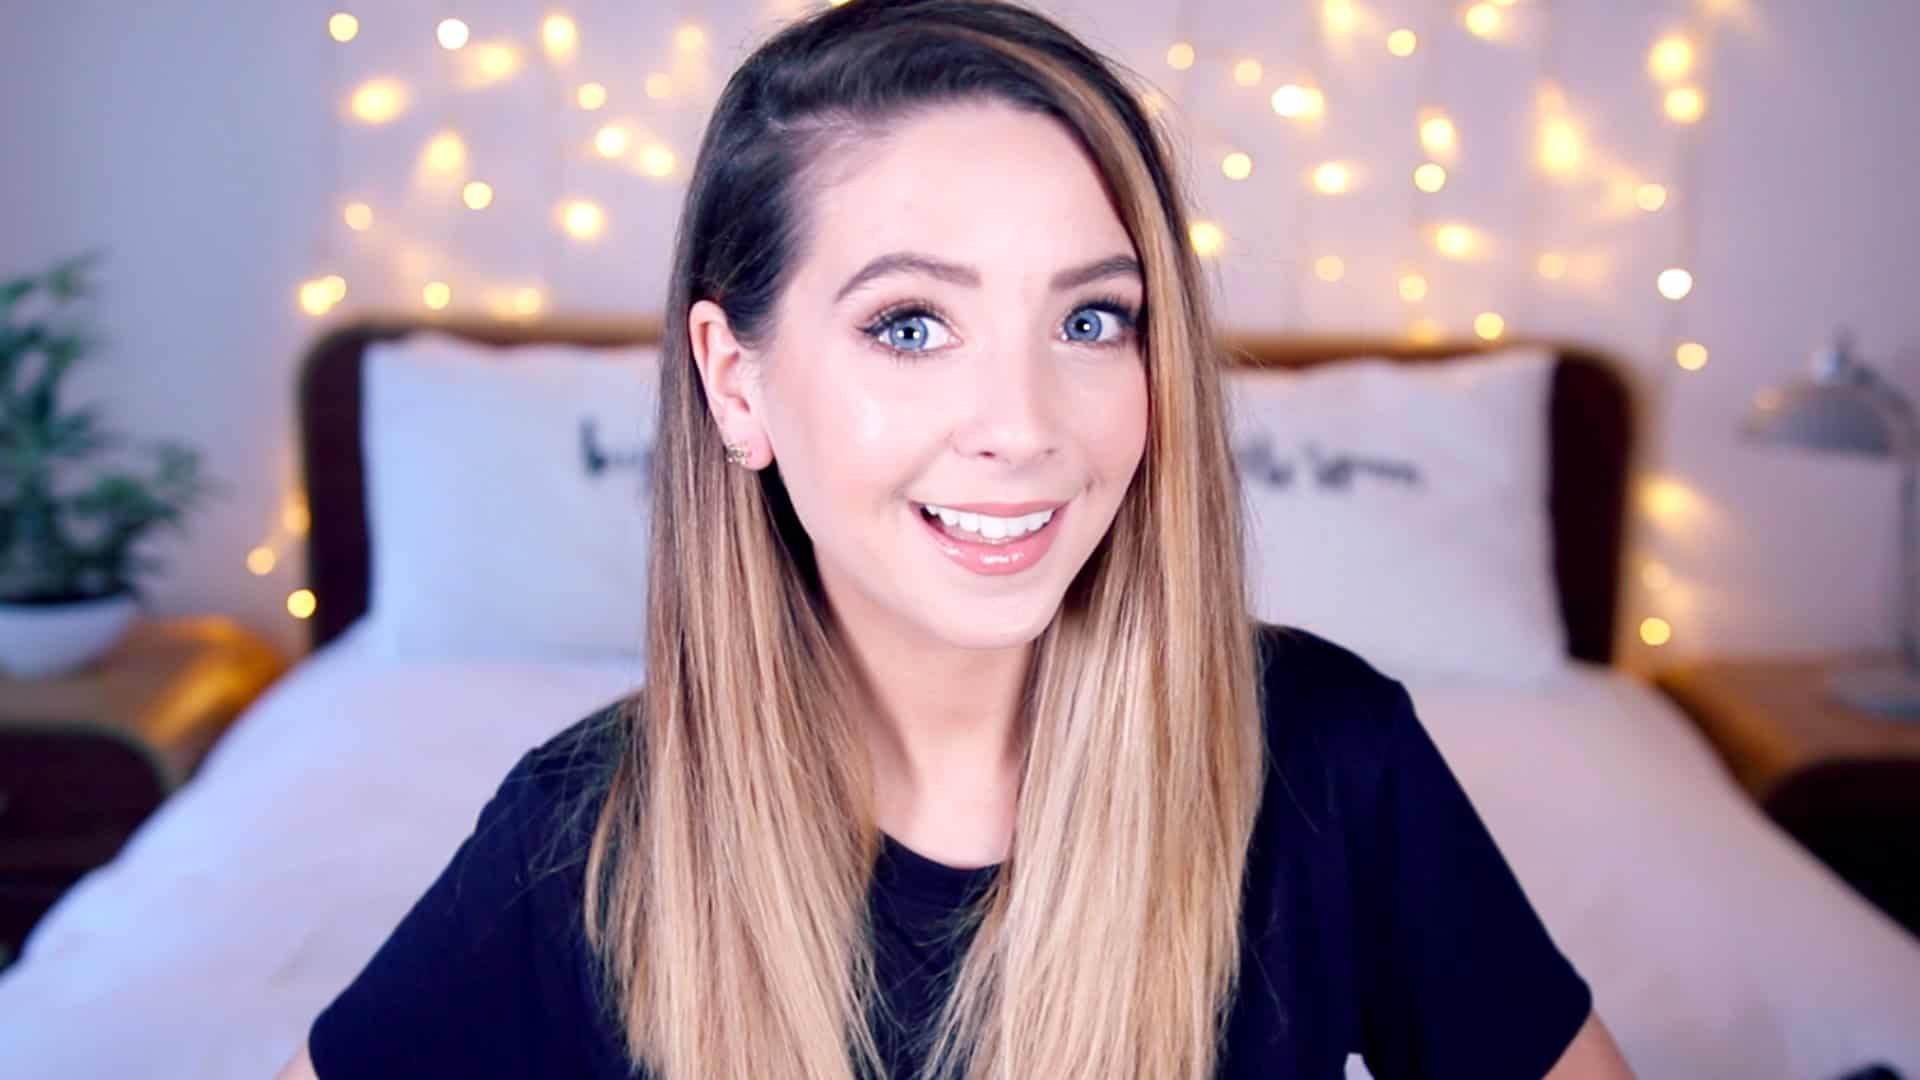 Zoella recording from her room